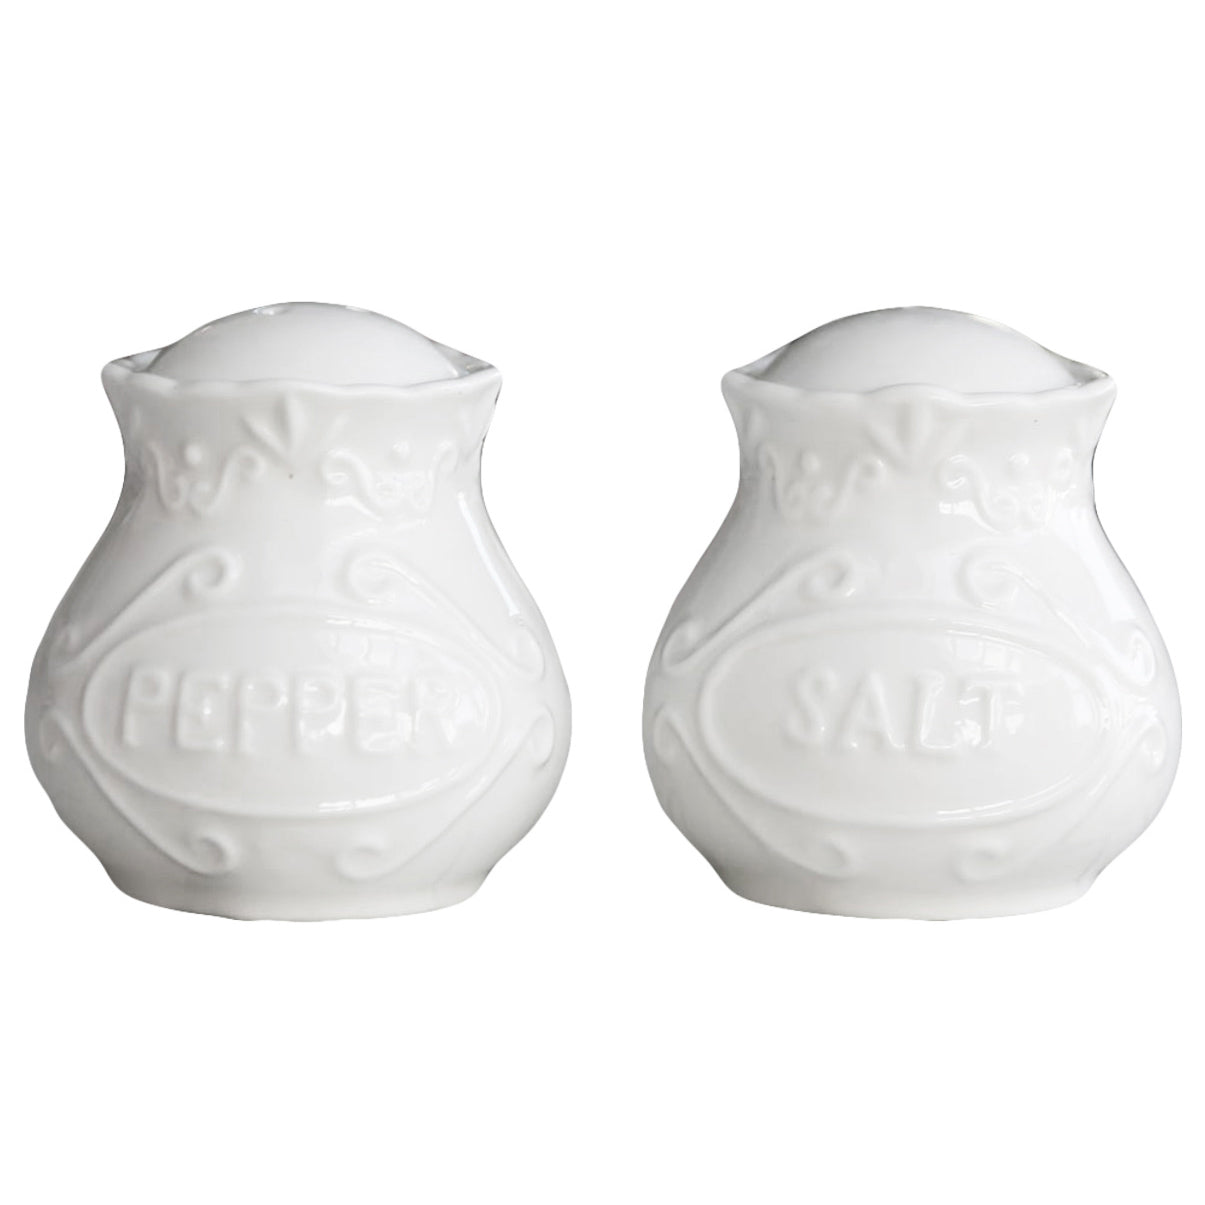 Shabby Chic Provence Salt And Pepper Condiment Dispensers Set